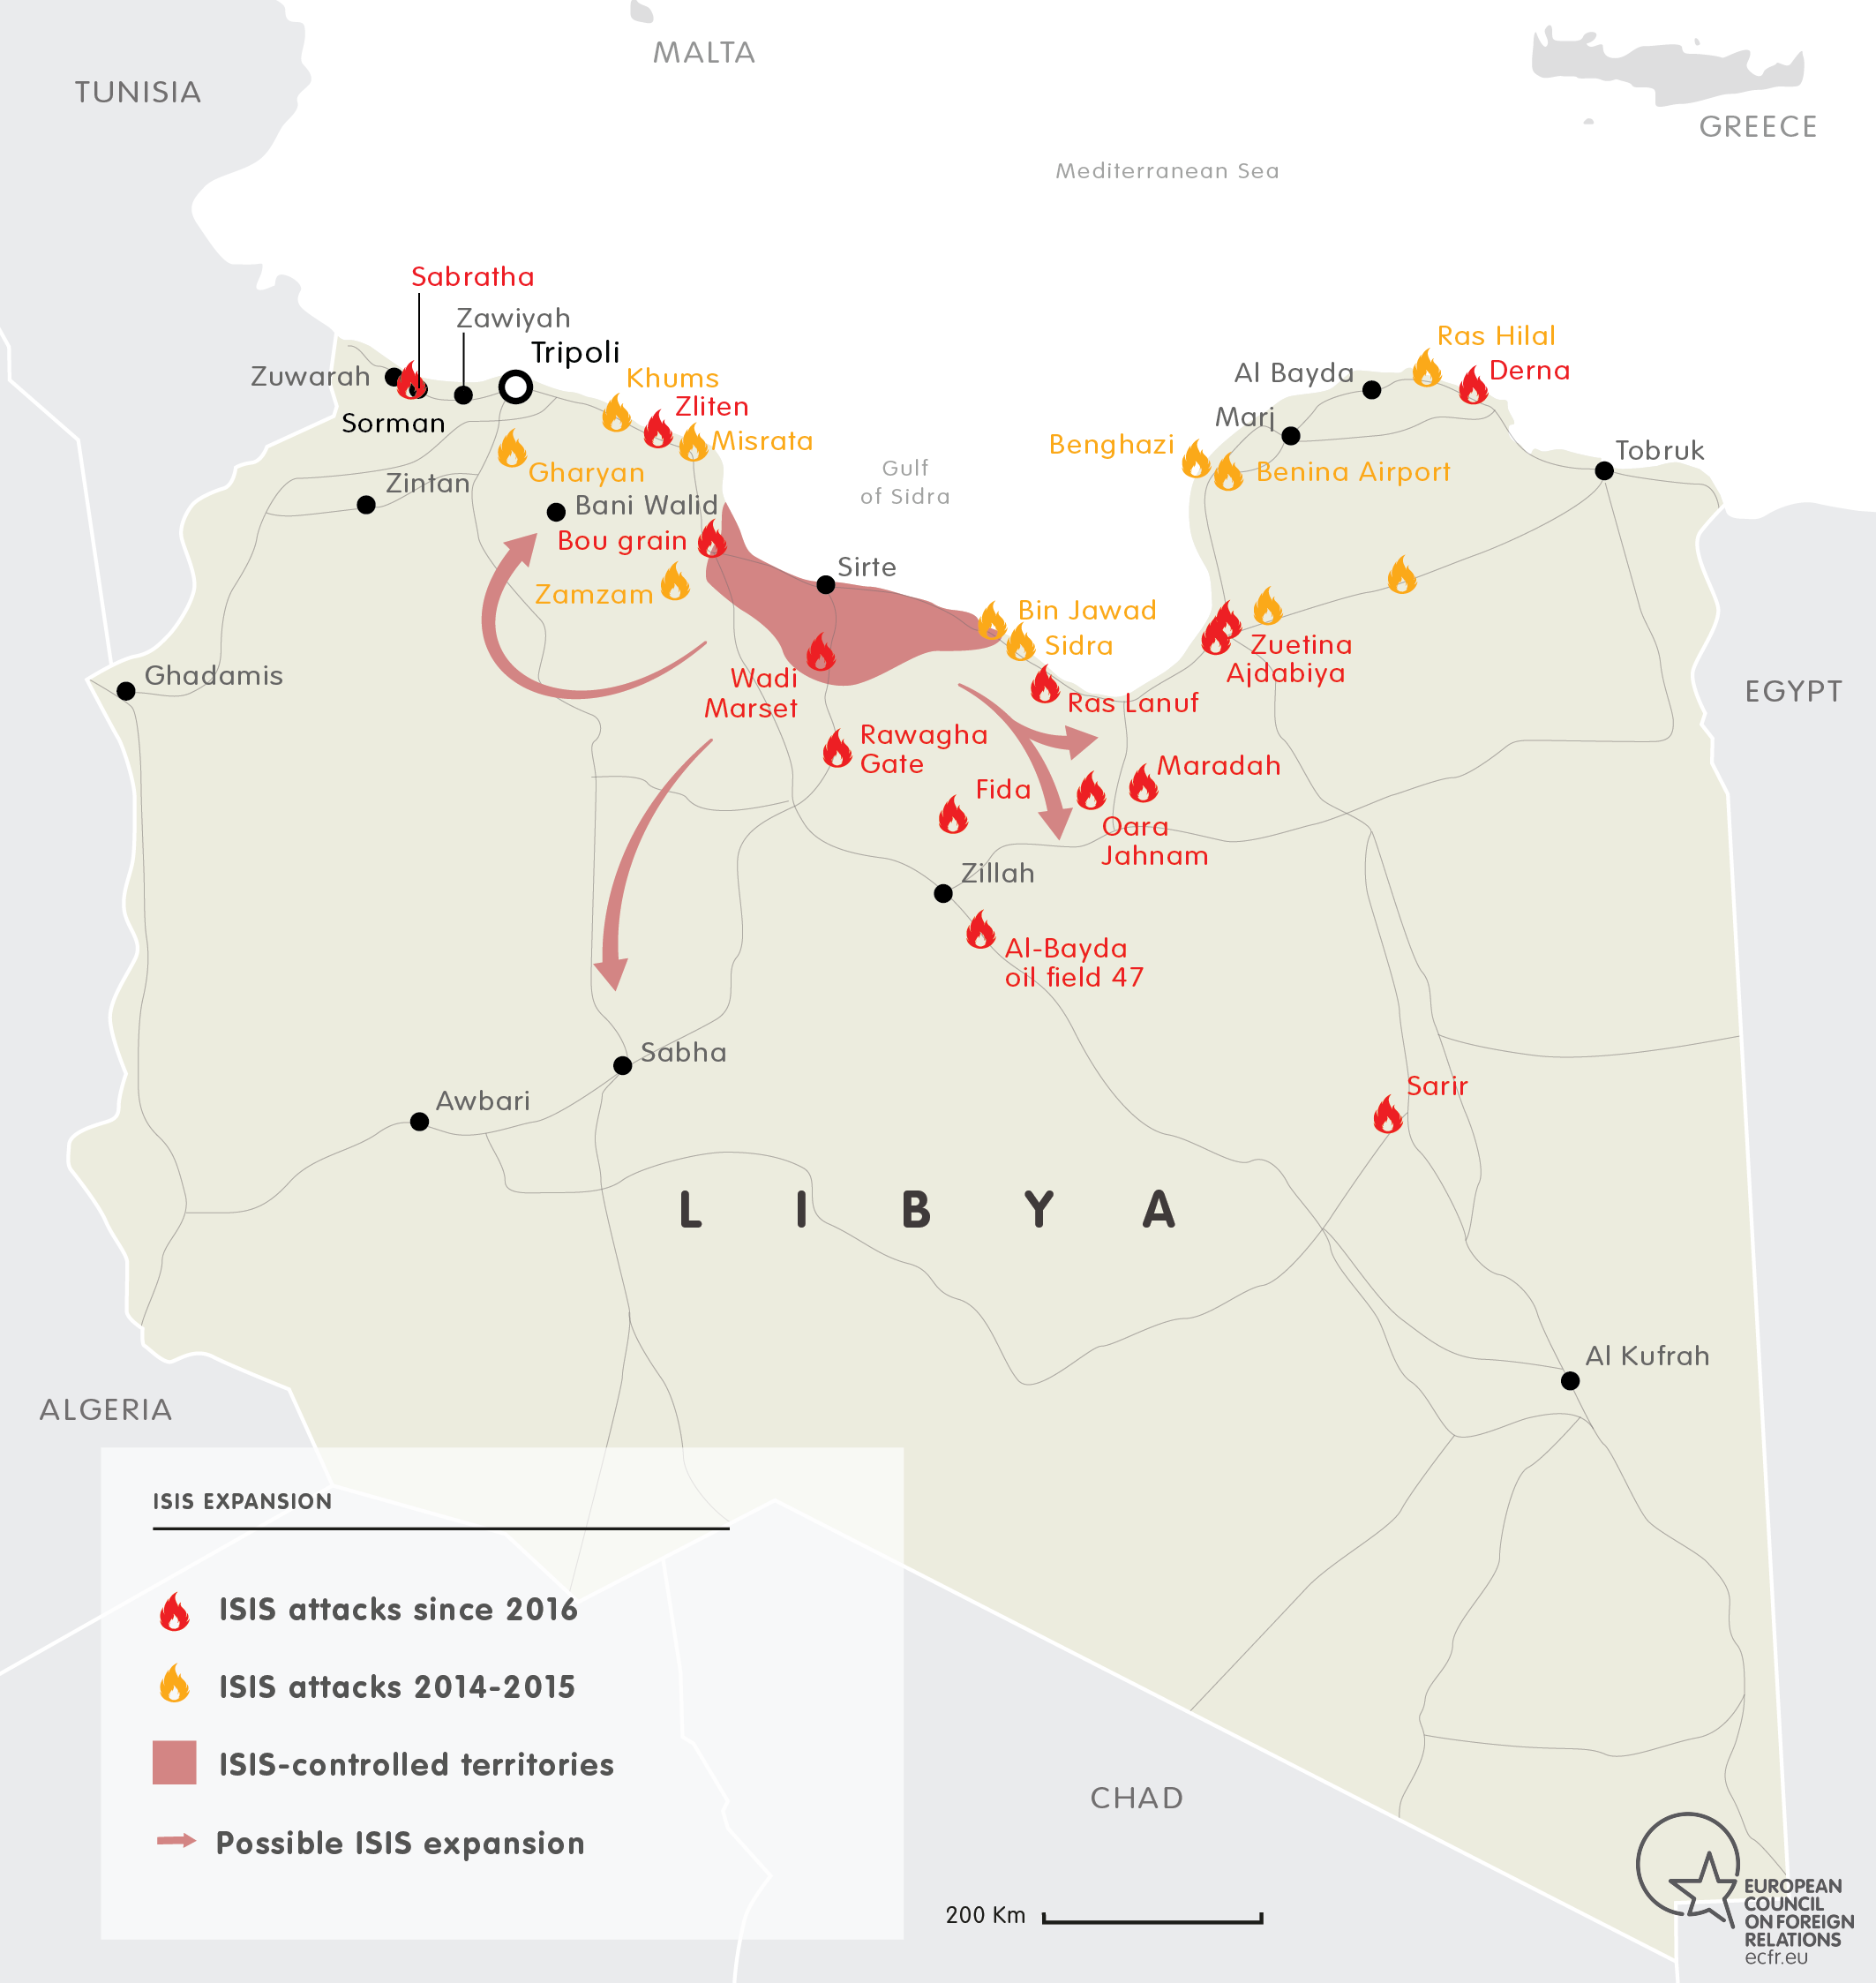 ISIS EXPANSION IN LIBYA 2015-2016